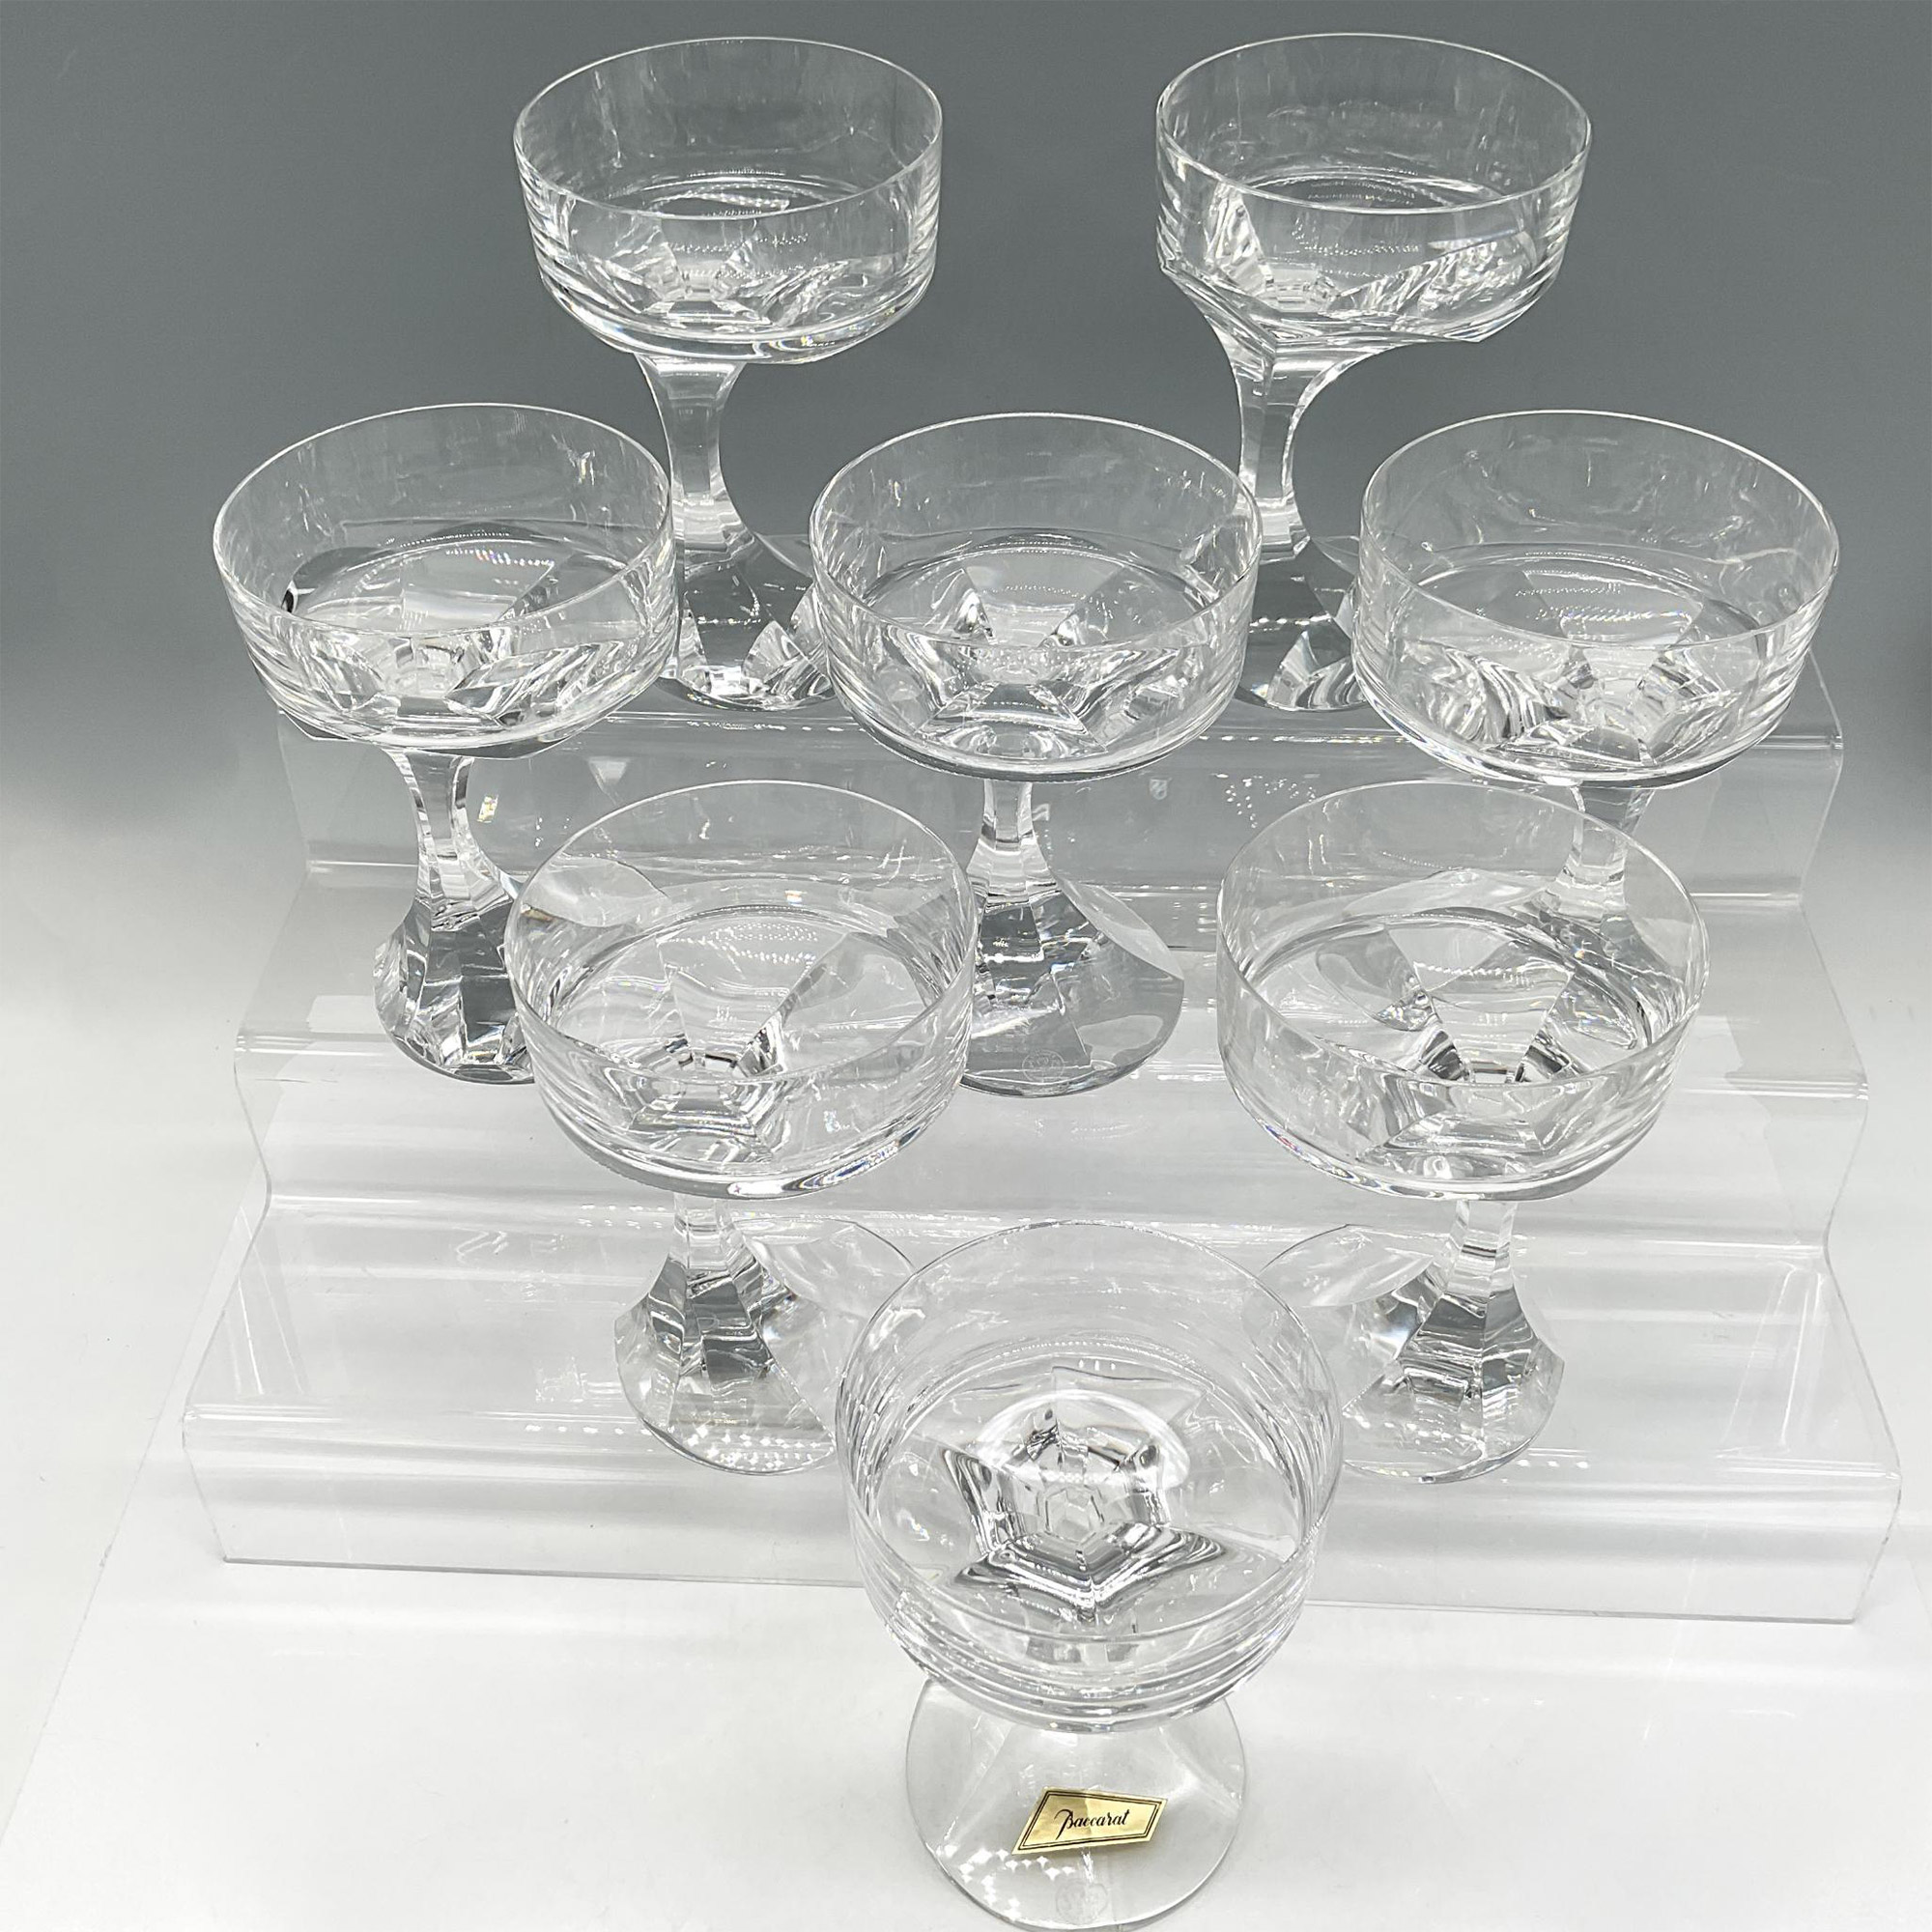 8pc Baccarat Crystal Champagne Coupes, Narcisse - Image 2 of 4